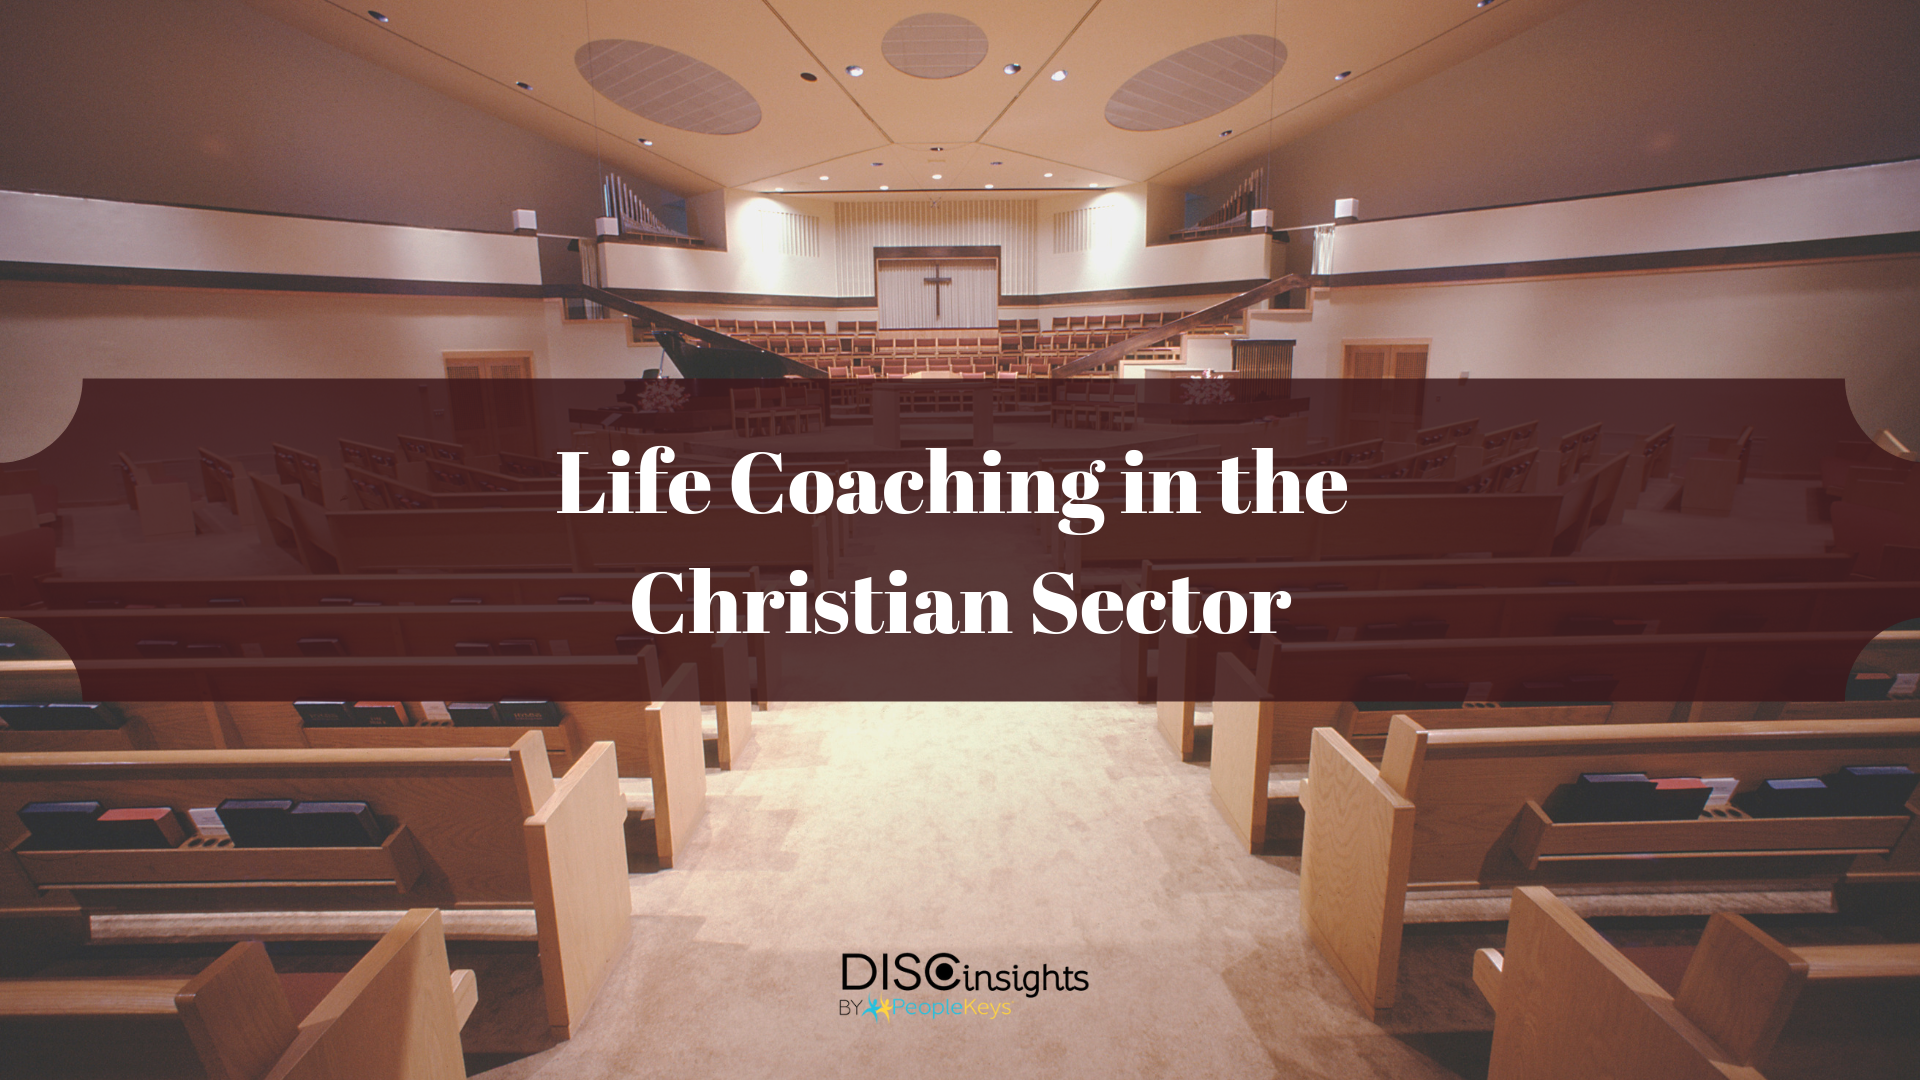 Life Coaching in the Christian Sector